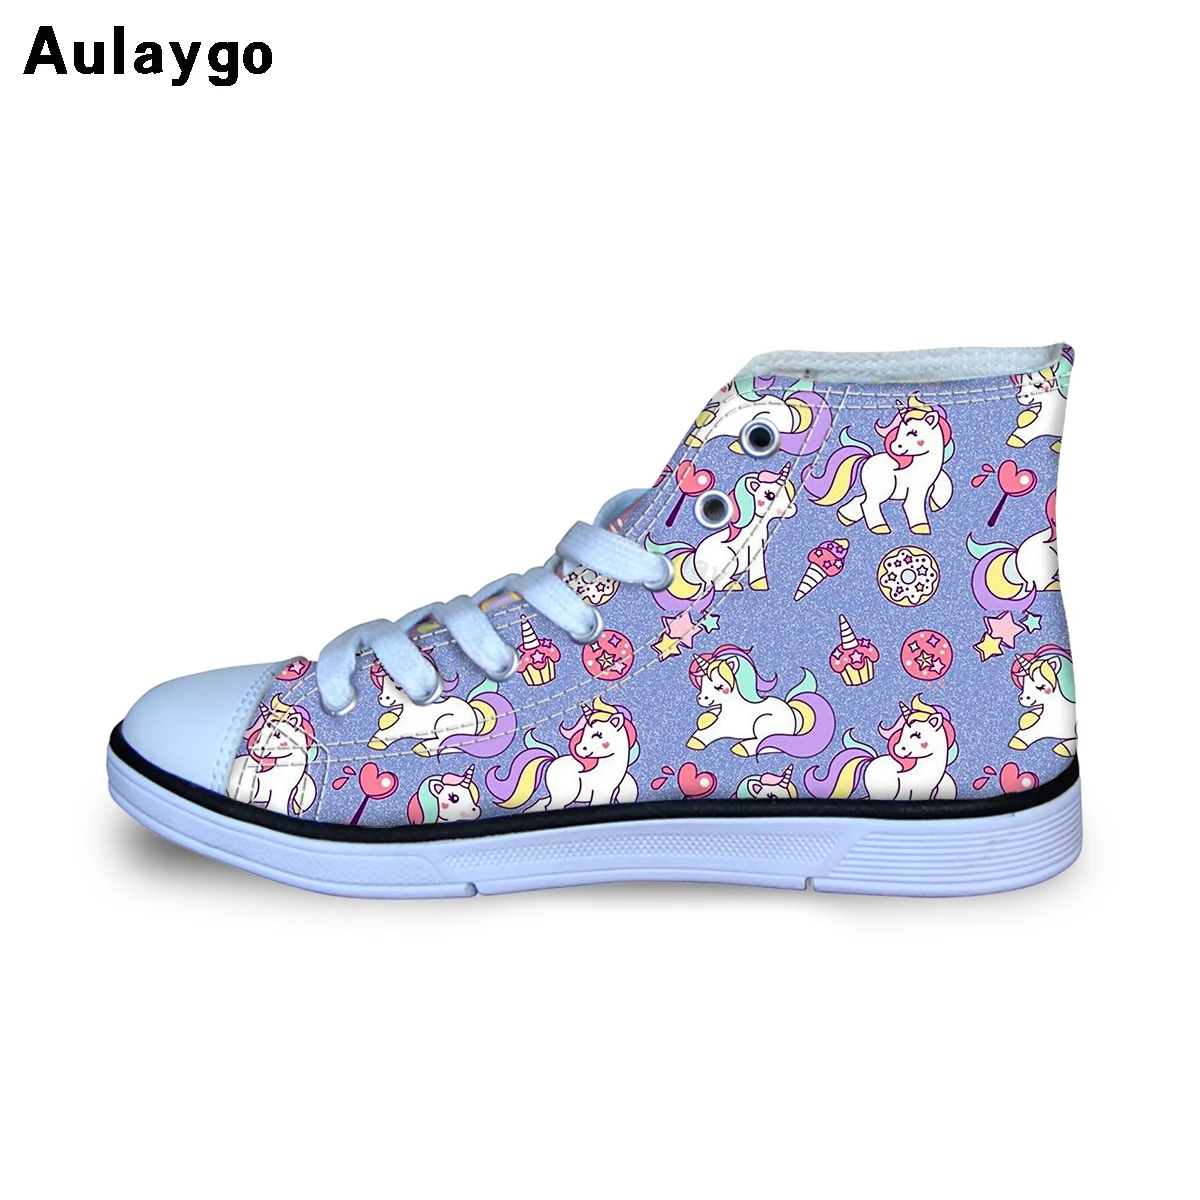 

Aulaygo Cute Unicorn Pattern Kids Shoes For Girl Canvas Casual Flats Children Sports Lace-up Outdoor High TopFootwear Sapatos